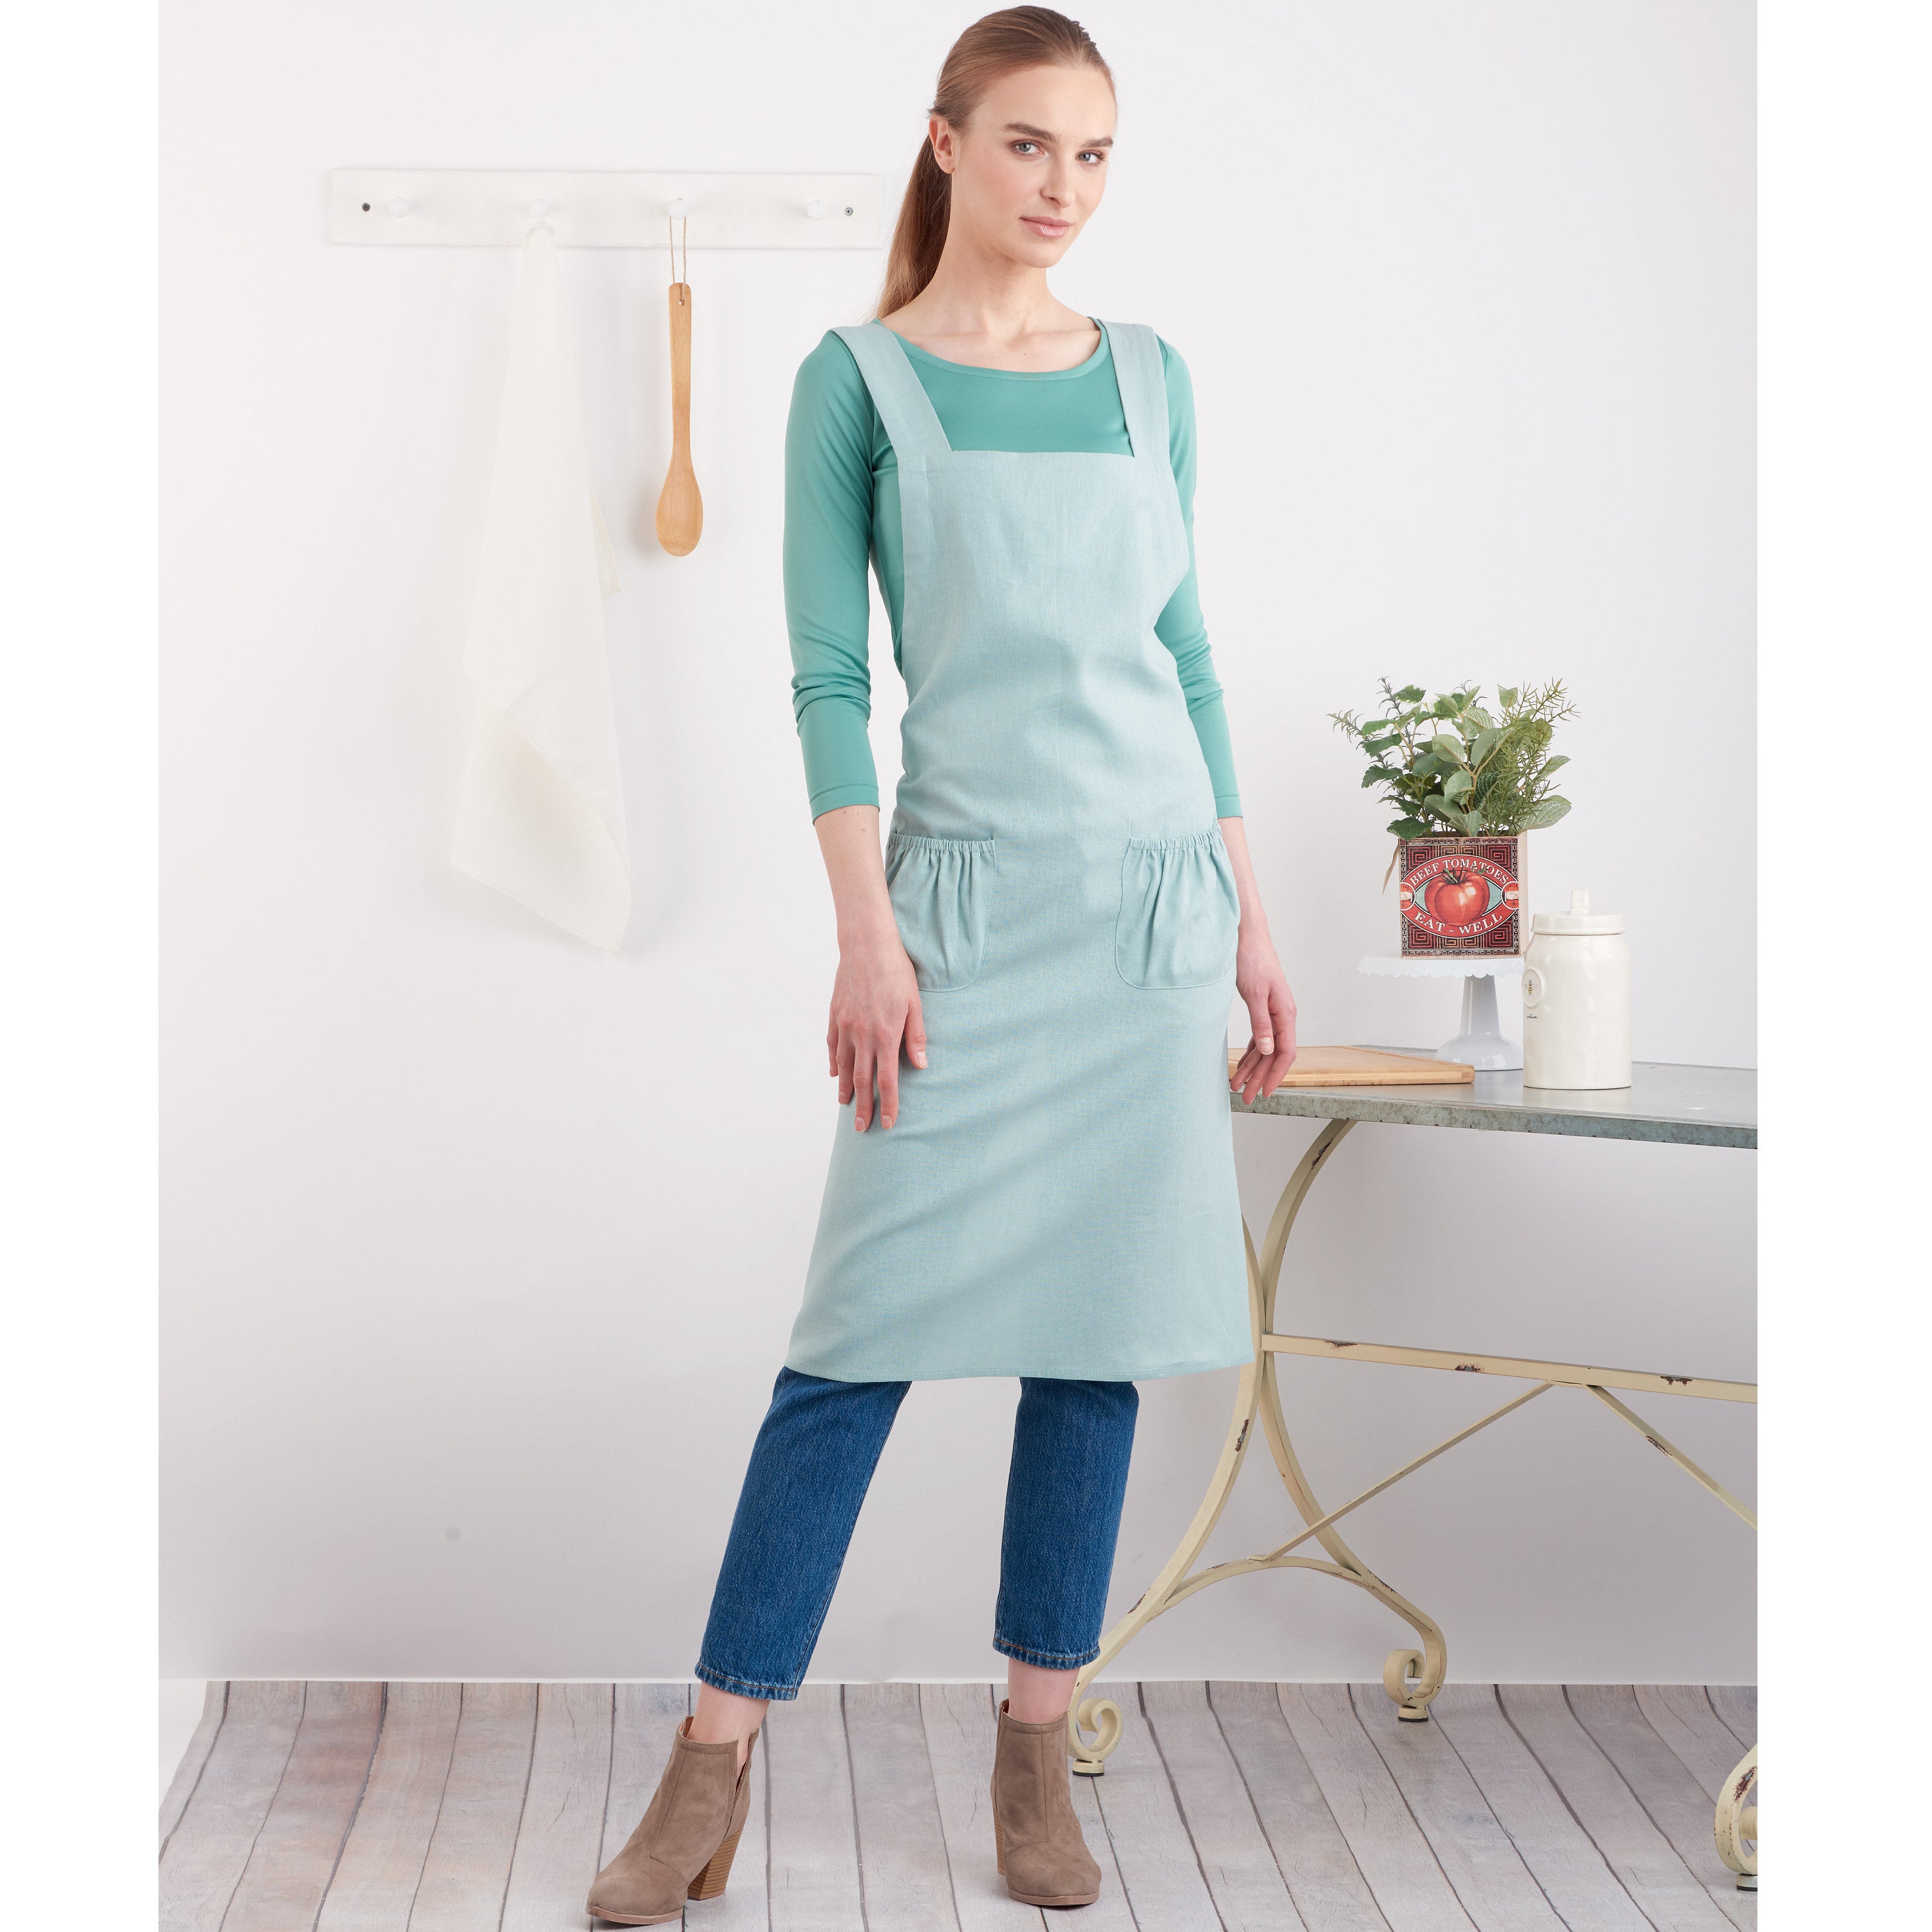 Simplicity Sewing Pattern 9436 Adults' and Children's Aprons from Jaycotts Sewing Supplies